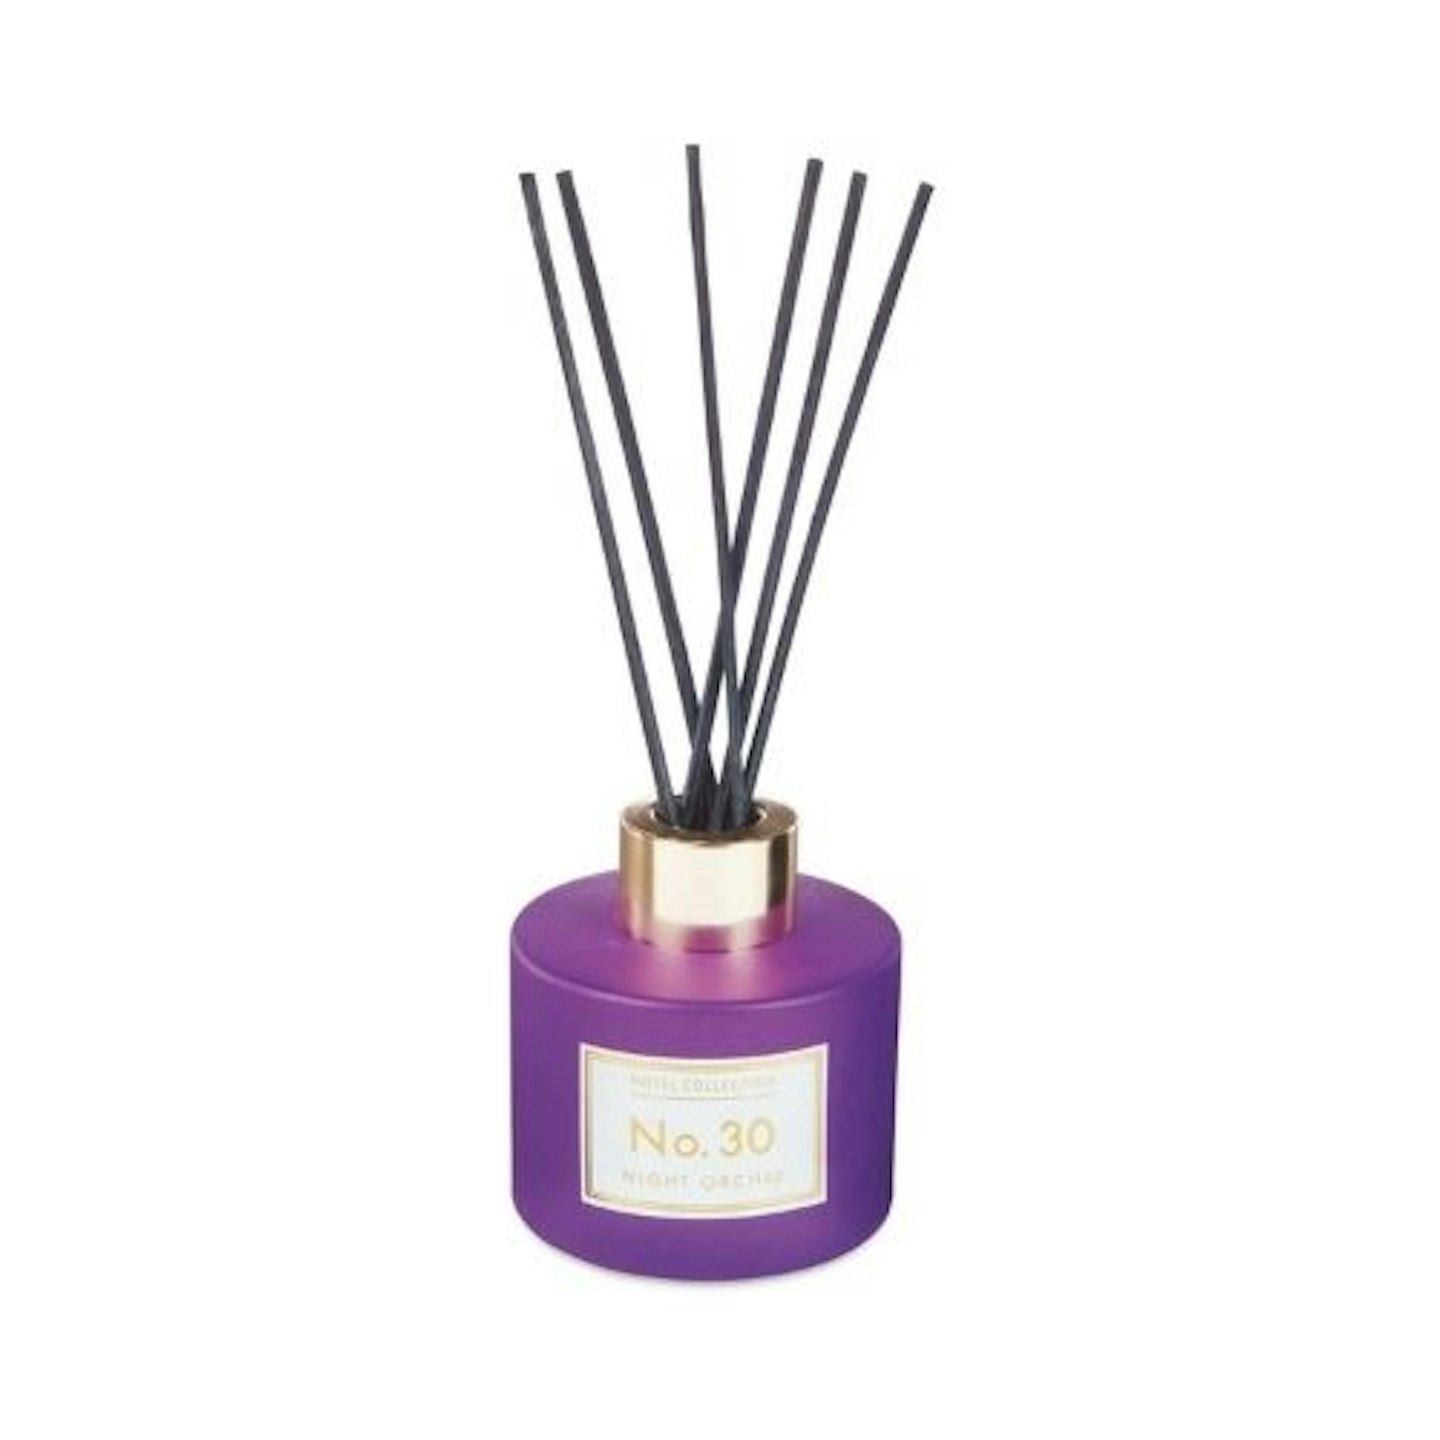 Aldi's Home Collection Orchid Diffuser, presented in a rich-purple bottle.